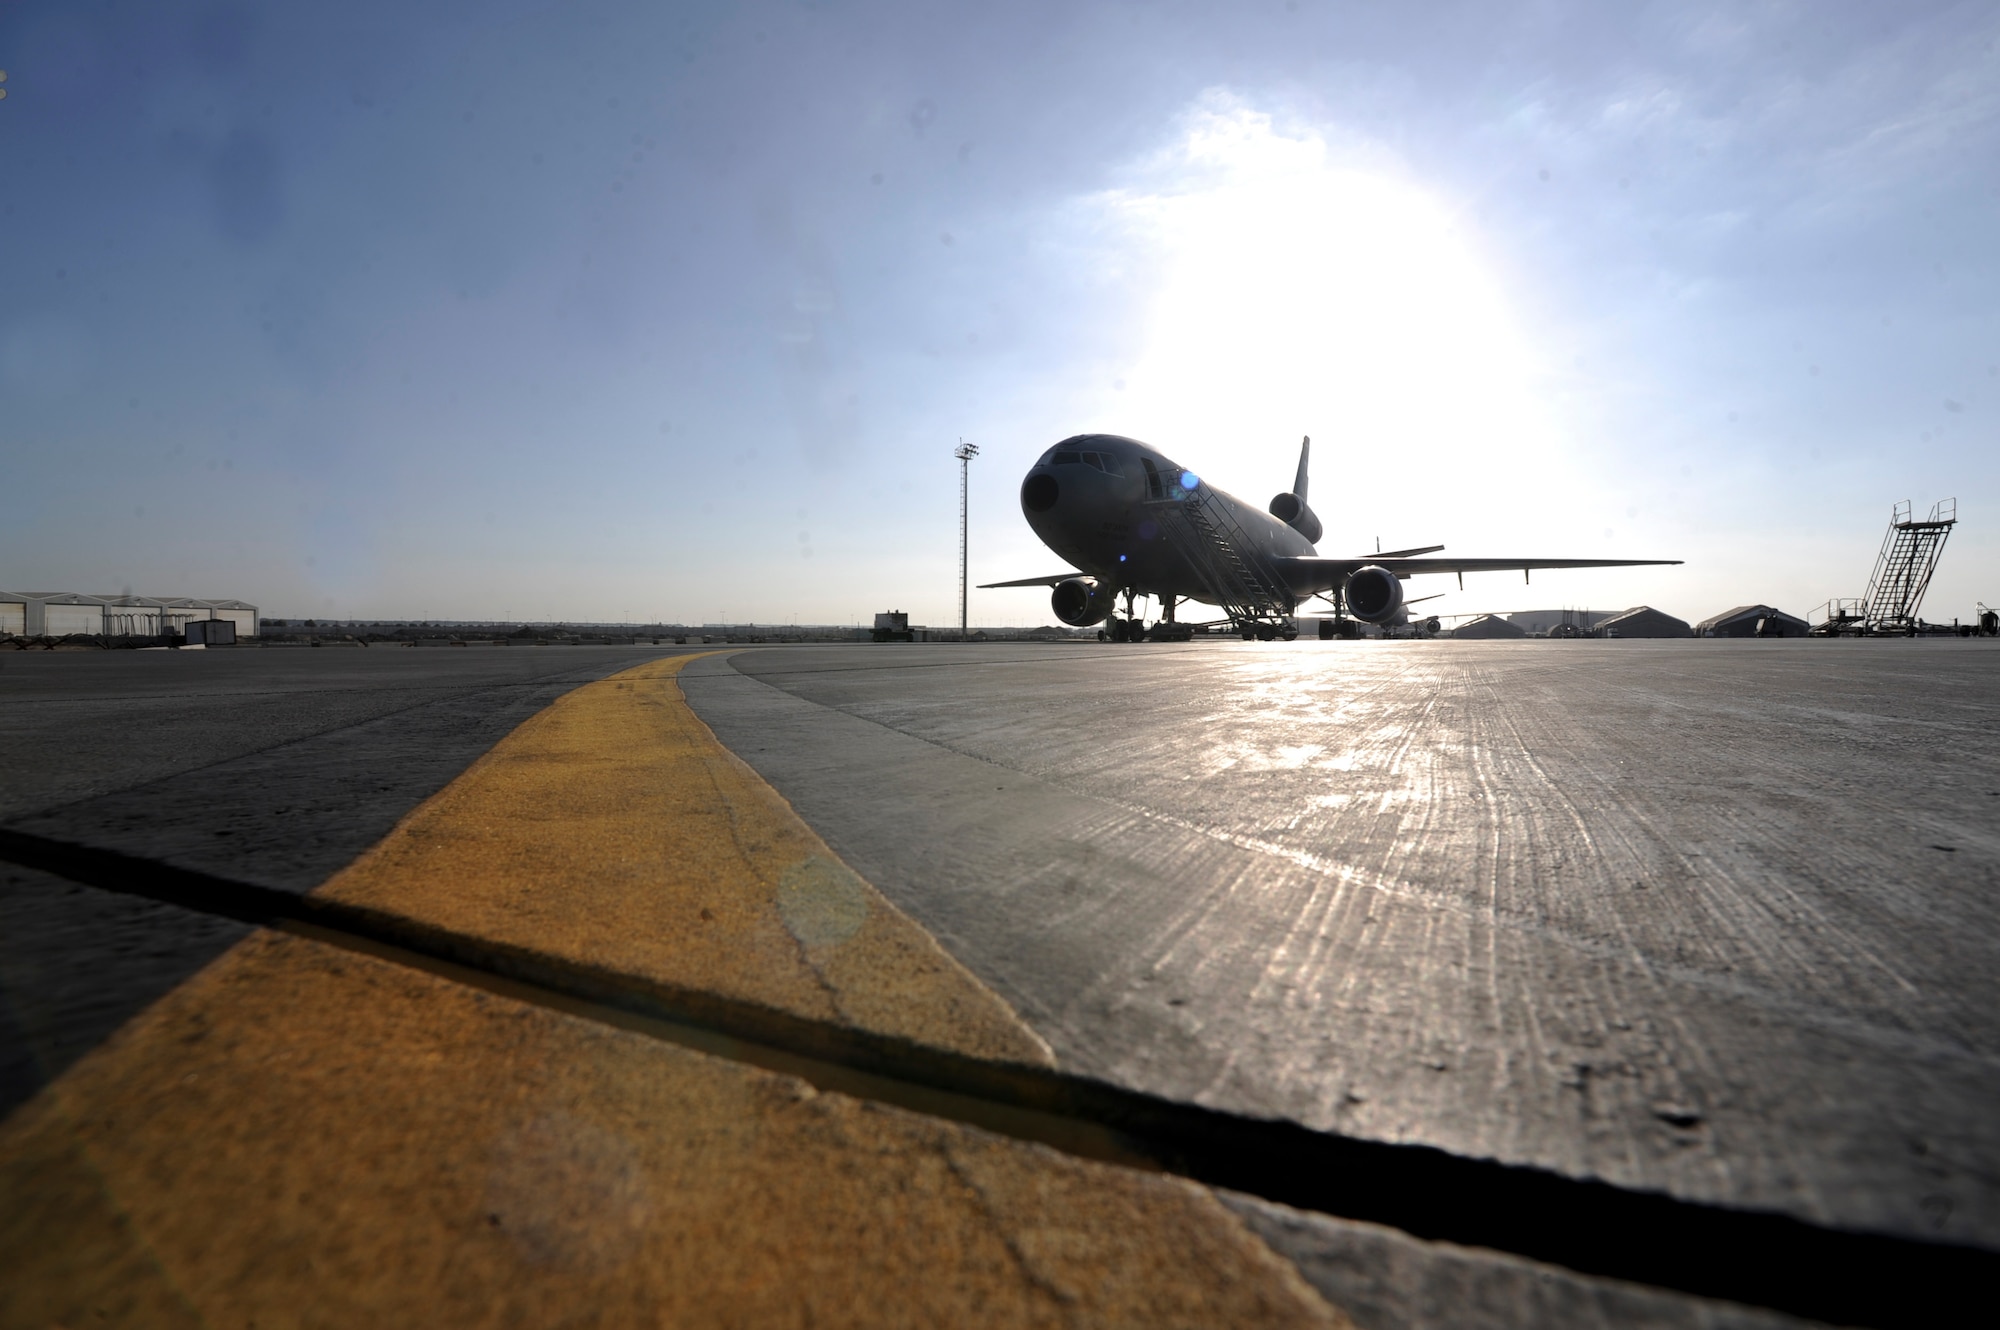 A U.S. Air Force KC-10 Extender assigned to the 380th Air Expeditionary Wing, Al Dhafra Air Base, United Arab Emirates, sits on the flight line Feb. 2, 2018. The KC-10 Extender is an advanced tanker and cargo aircraft that is designed to increase the Air Force’s global mobility through aerial refueling. (U.S. Air Force photo by Airman 1st Class D. Blake Browning)